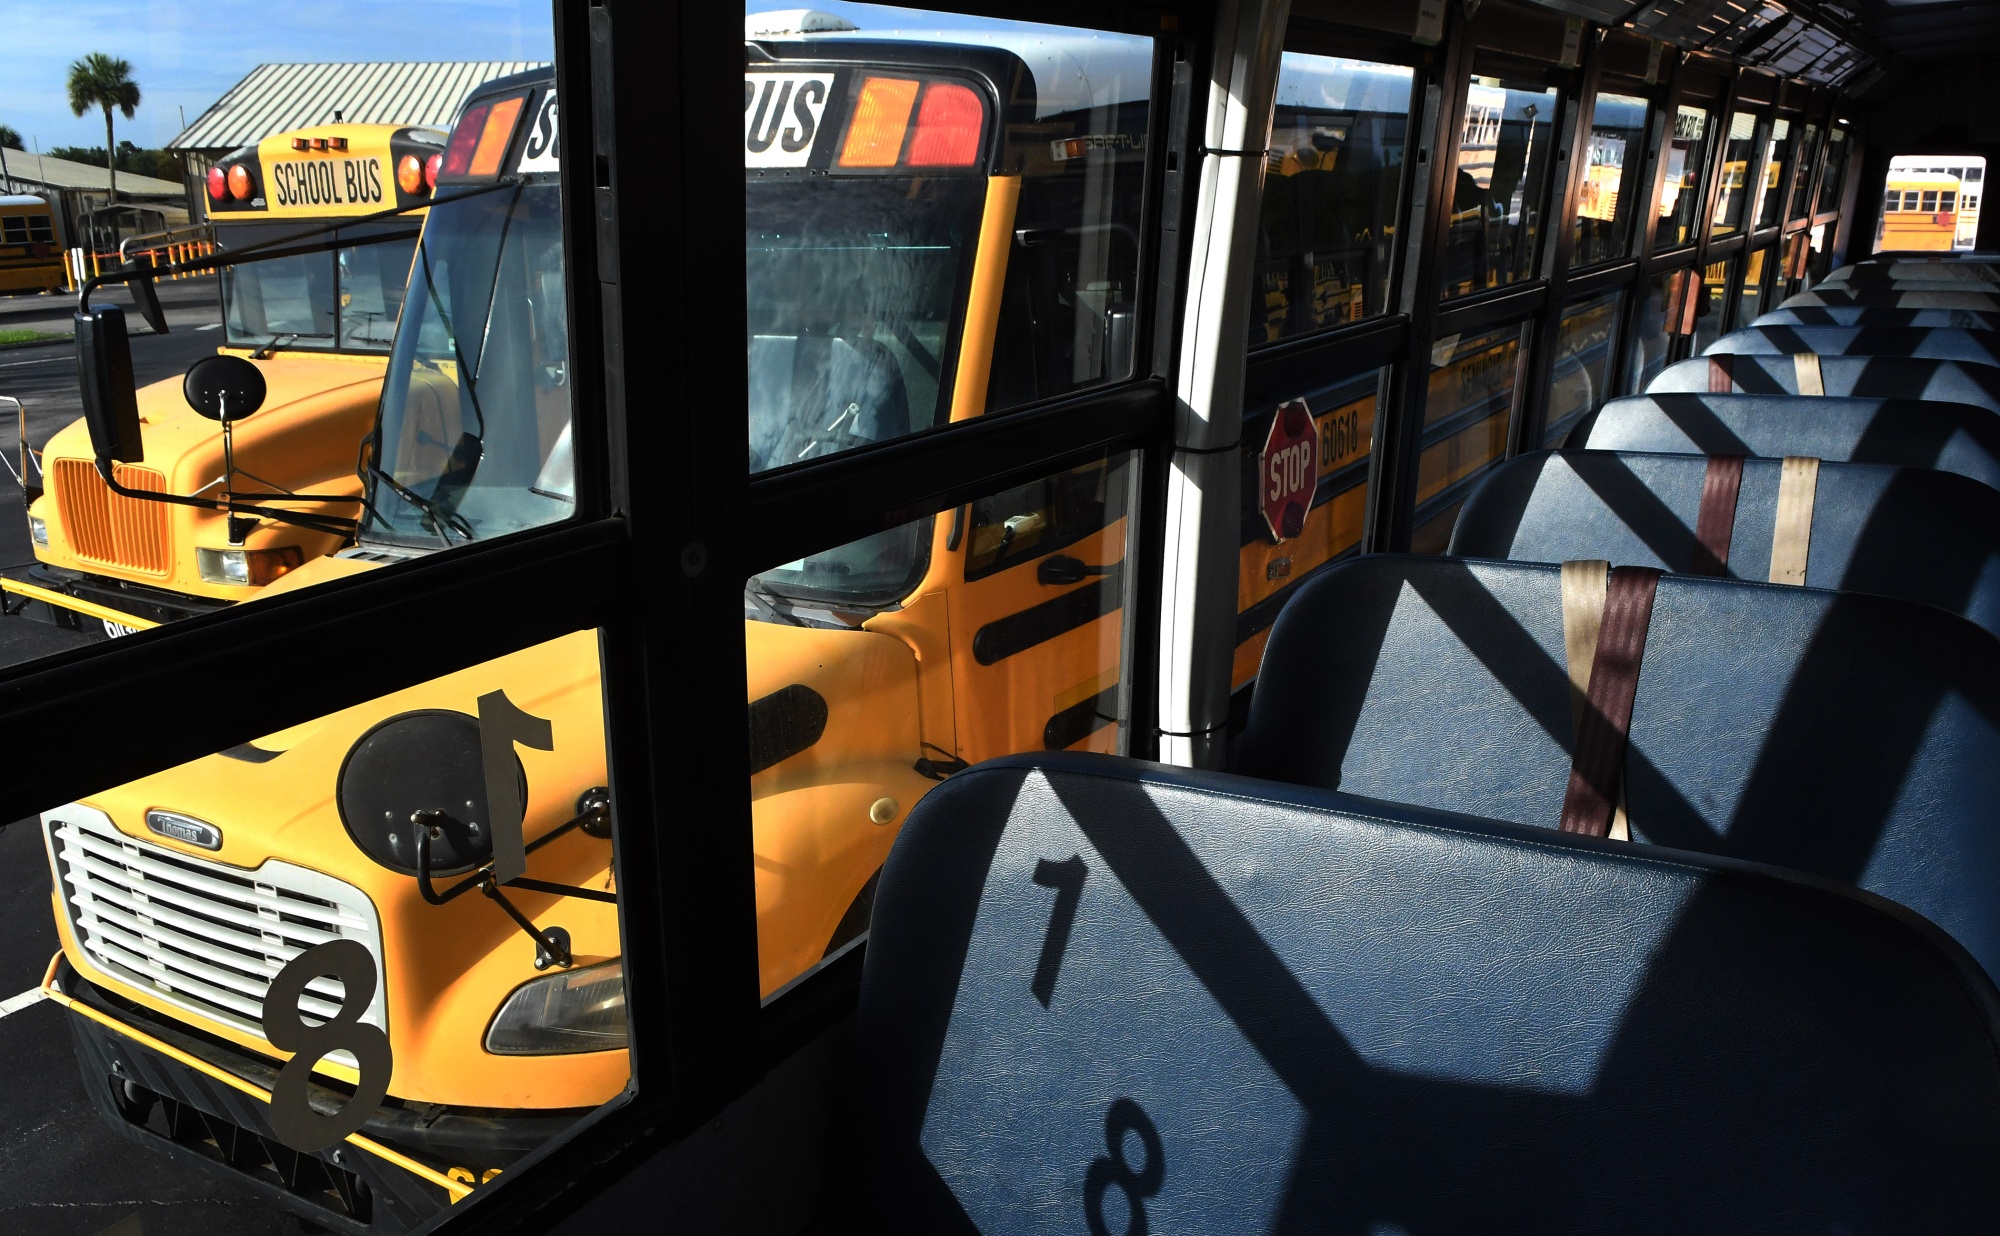 With many school buses at 50% capacity, a safe return to in-person classes is going to mean considering transportation alternatives.